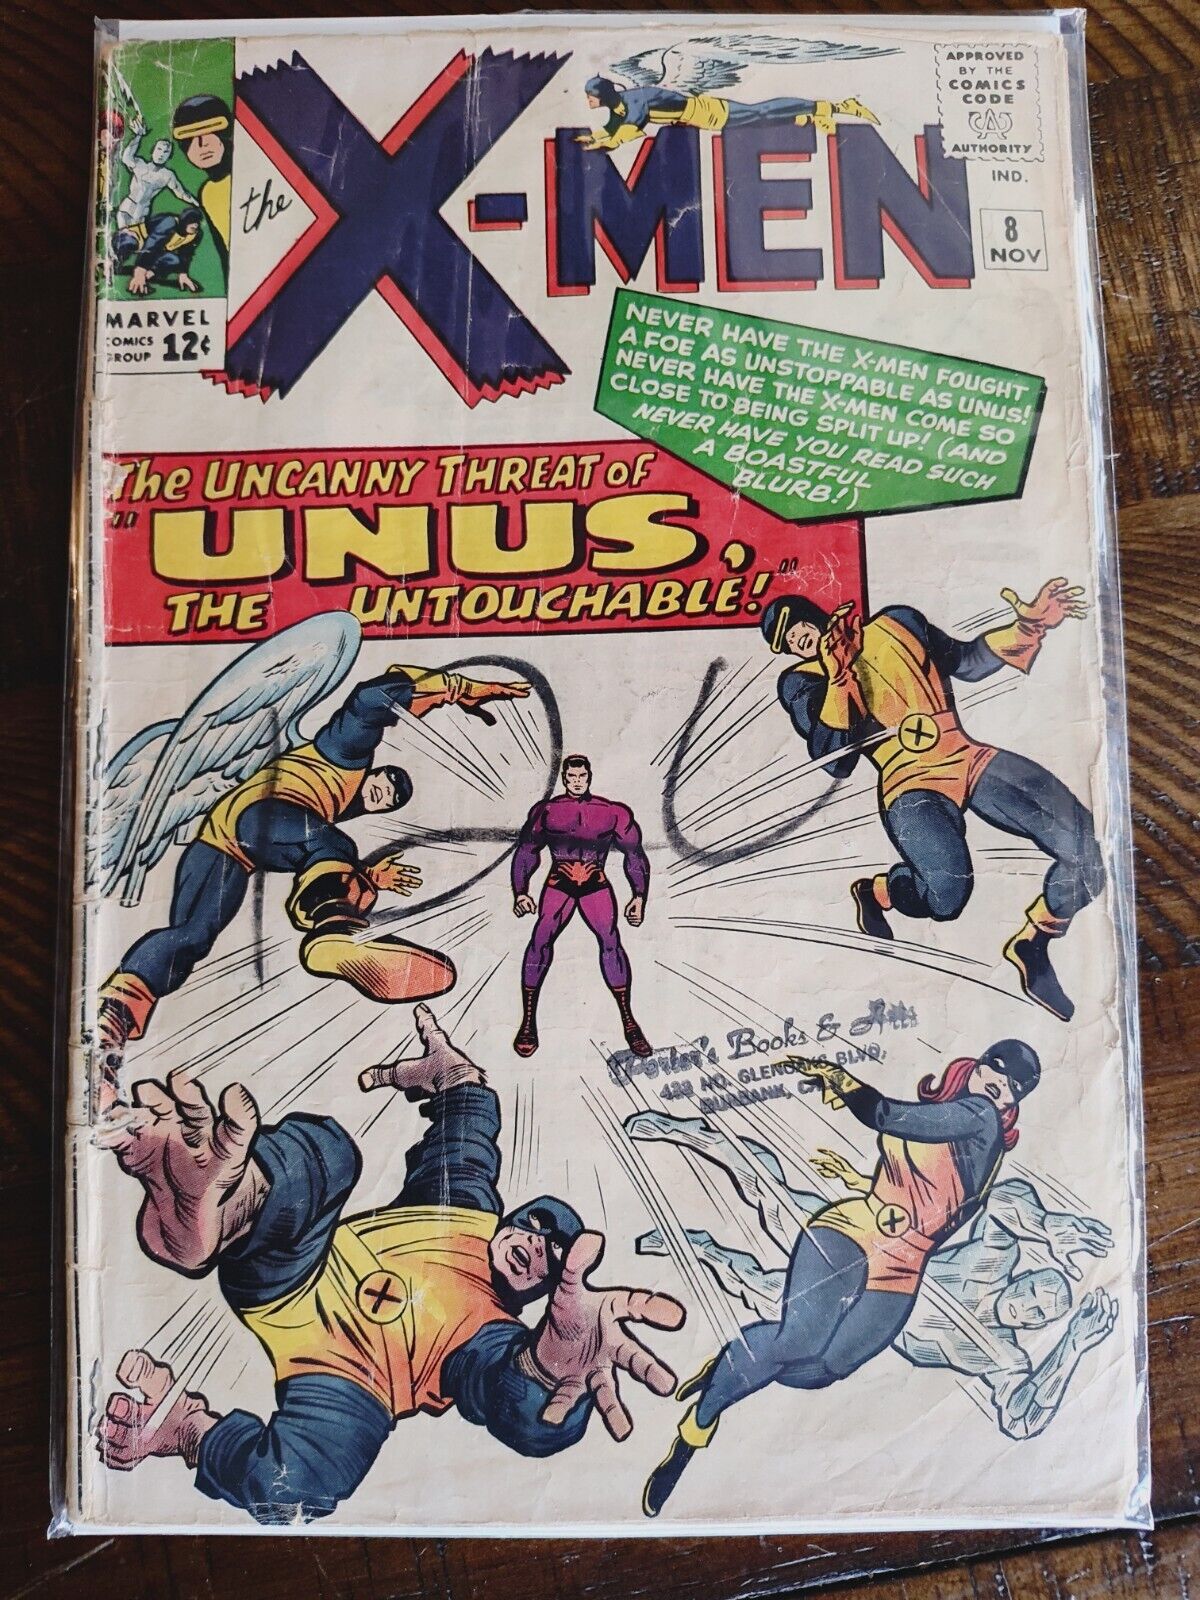 X-men #8 1964 Key Issue First Appearance of Unus the Untouchable